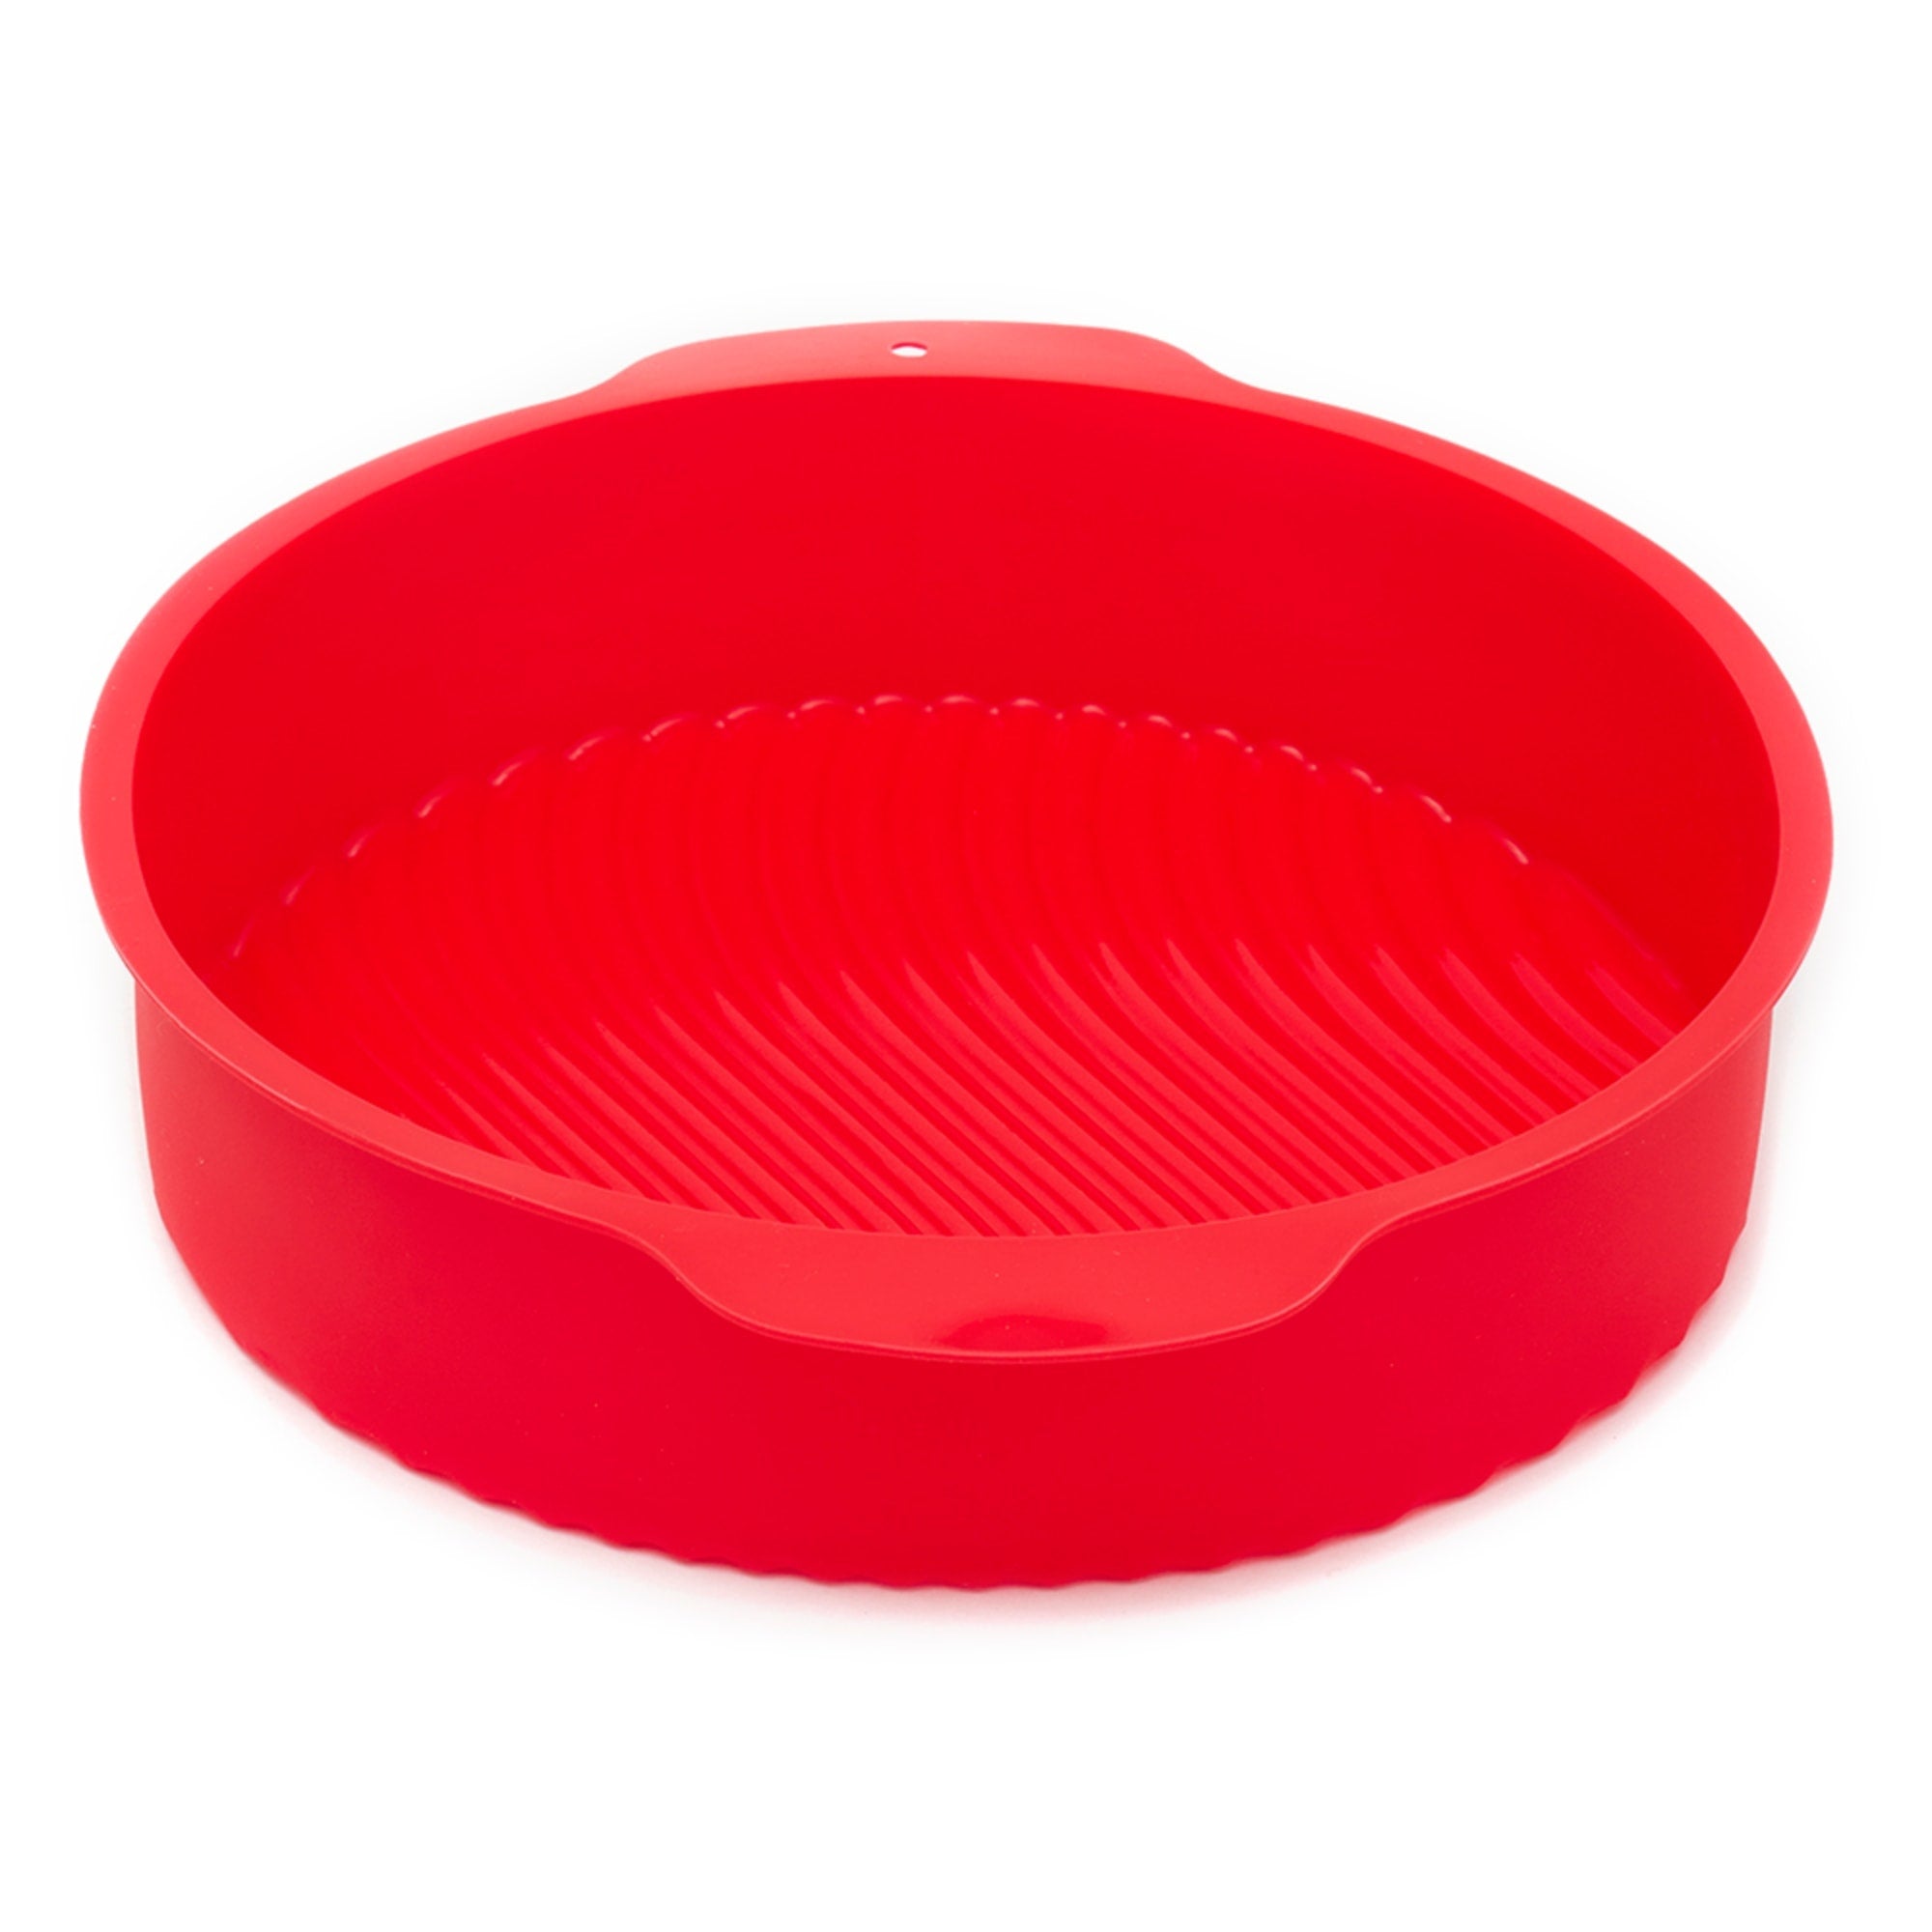 Home Basics Silicone Pie Pan $5.00 EACH, CASE PACK OF 24